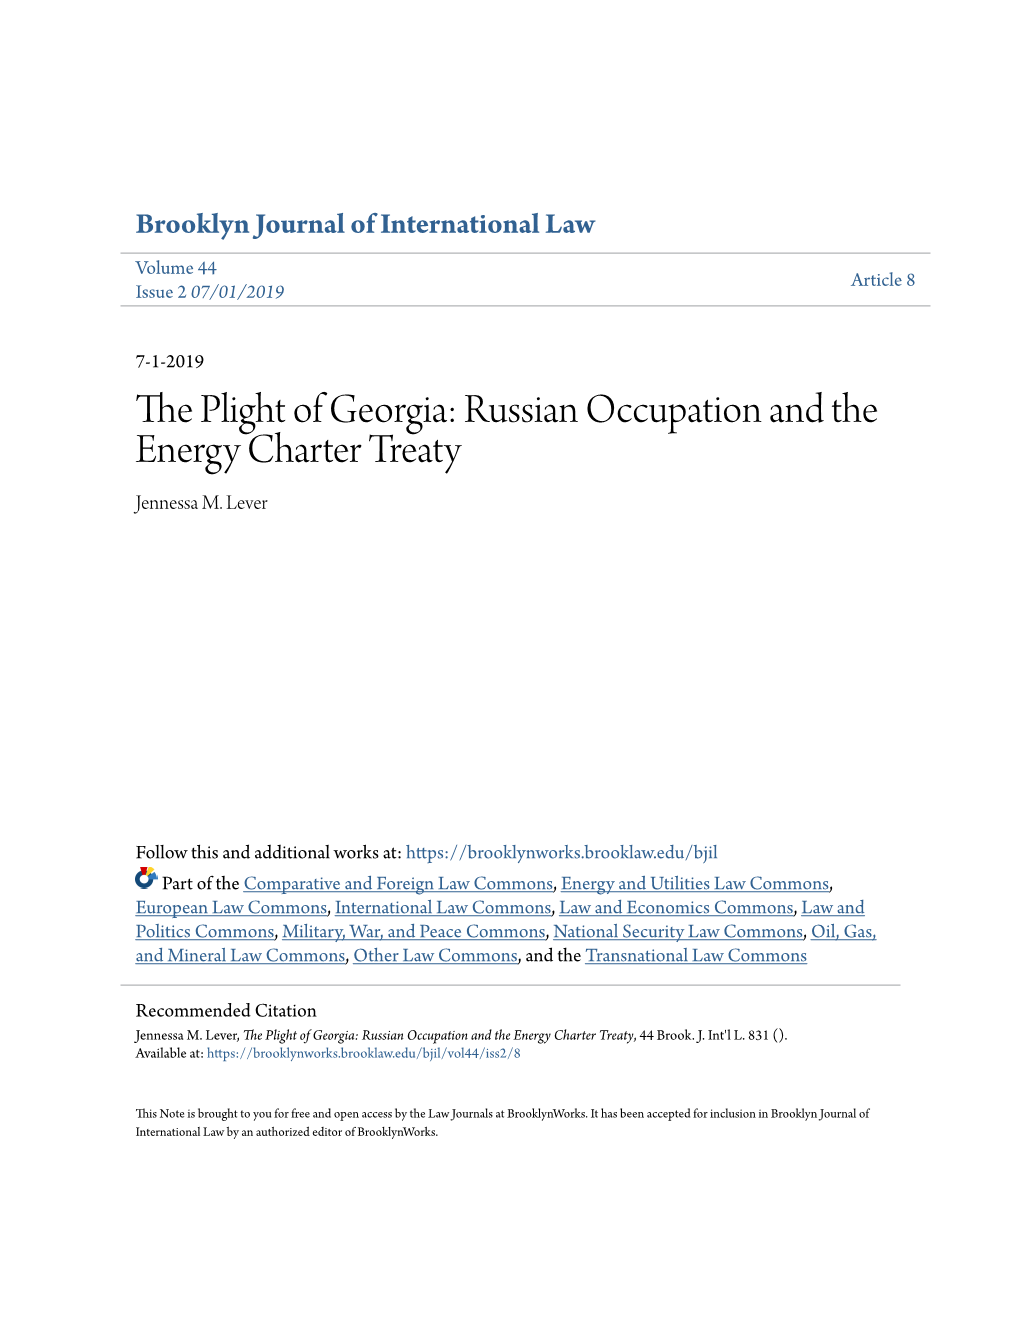 Russian Occupation and the Energy Charter Treaty Jennessa M